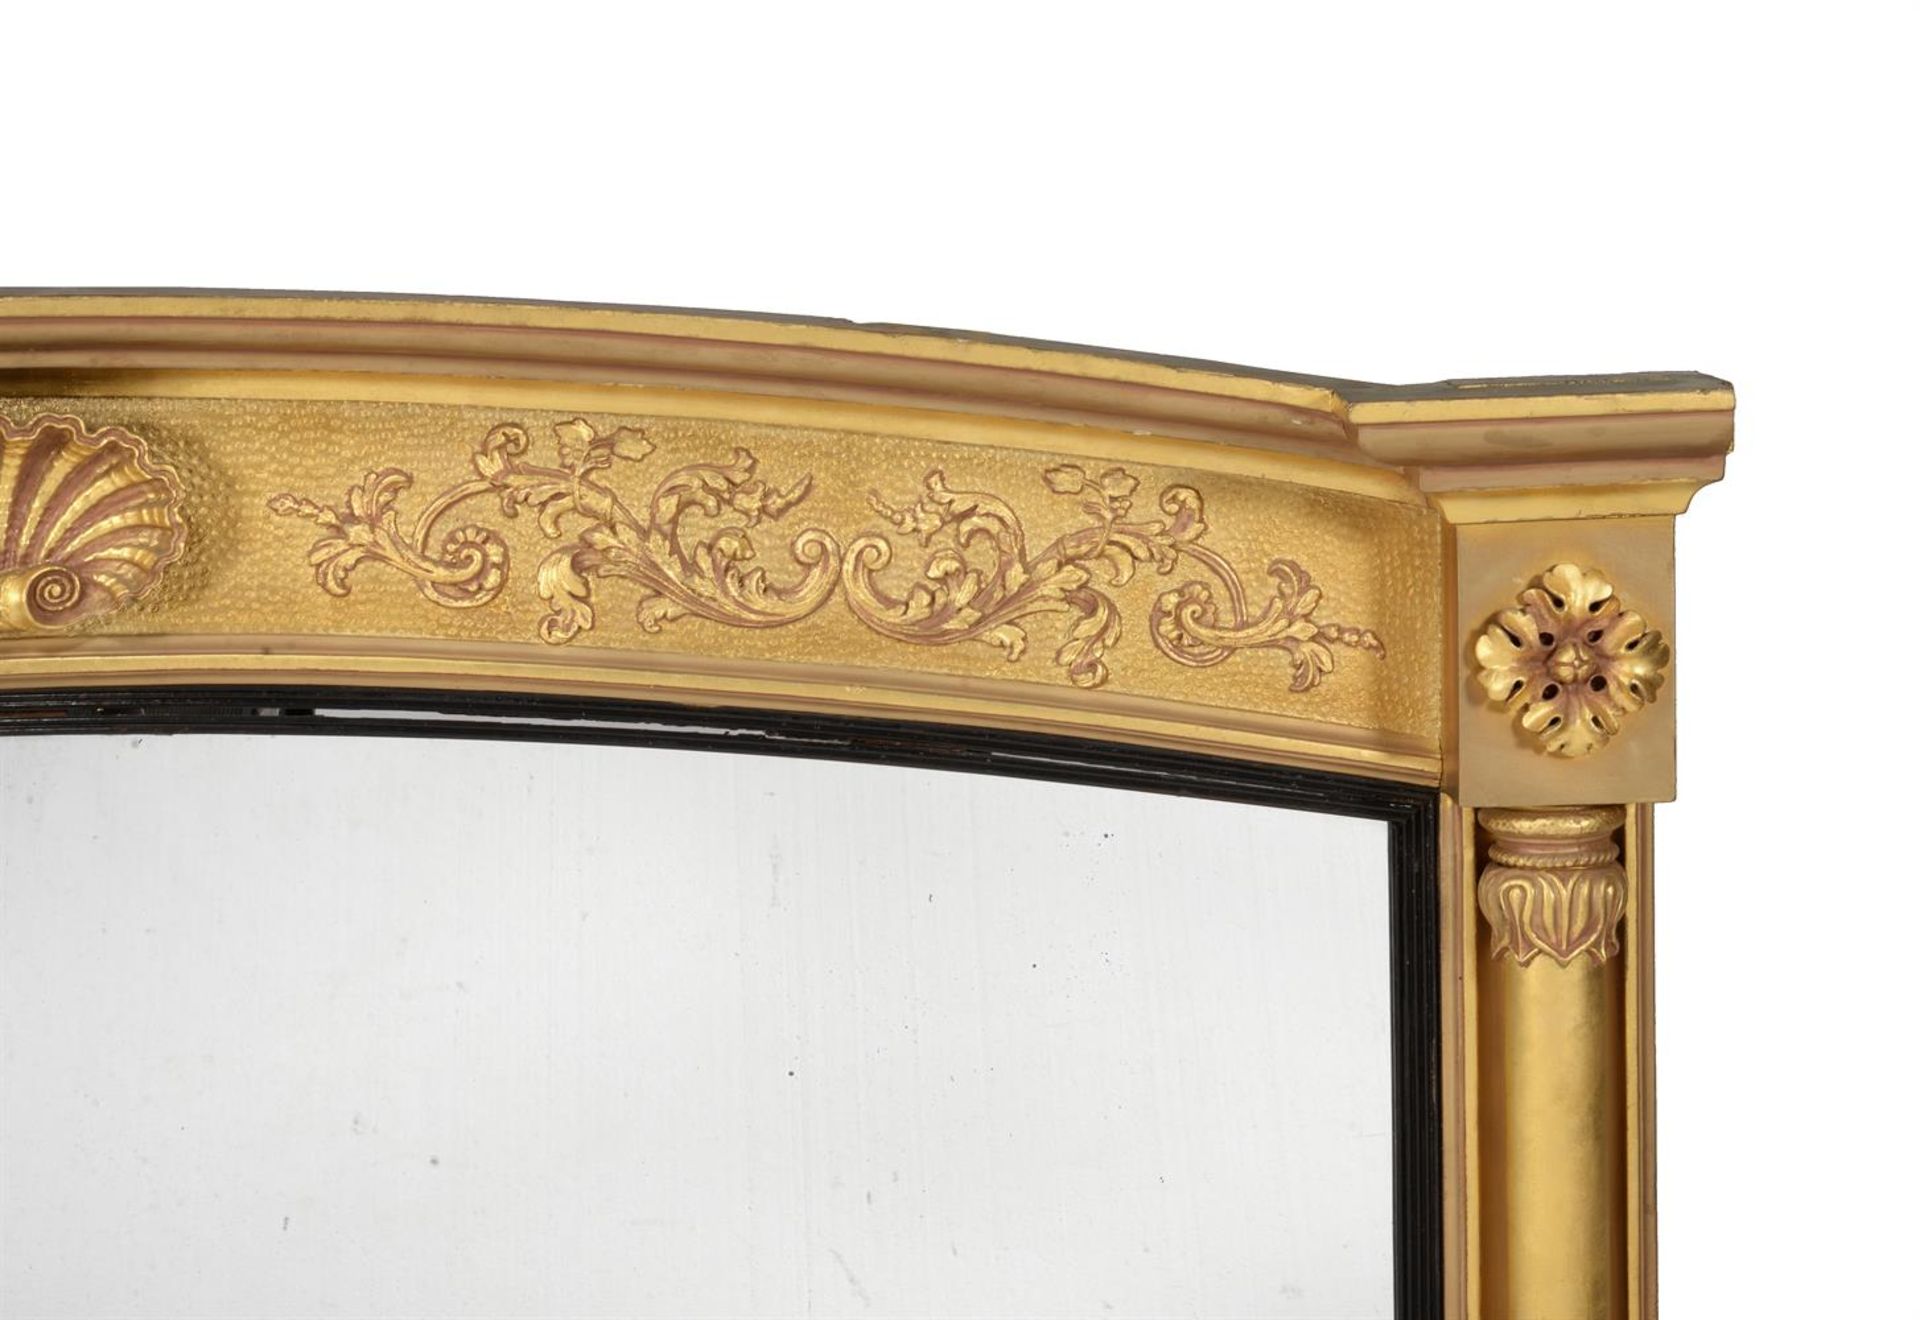 A GEORGE IV GILTWOOD AND COMPOSITION OVERMANTEL WALL MIRROR - Image 2 of 3